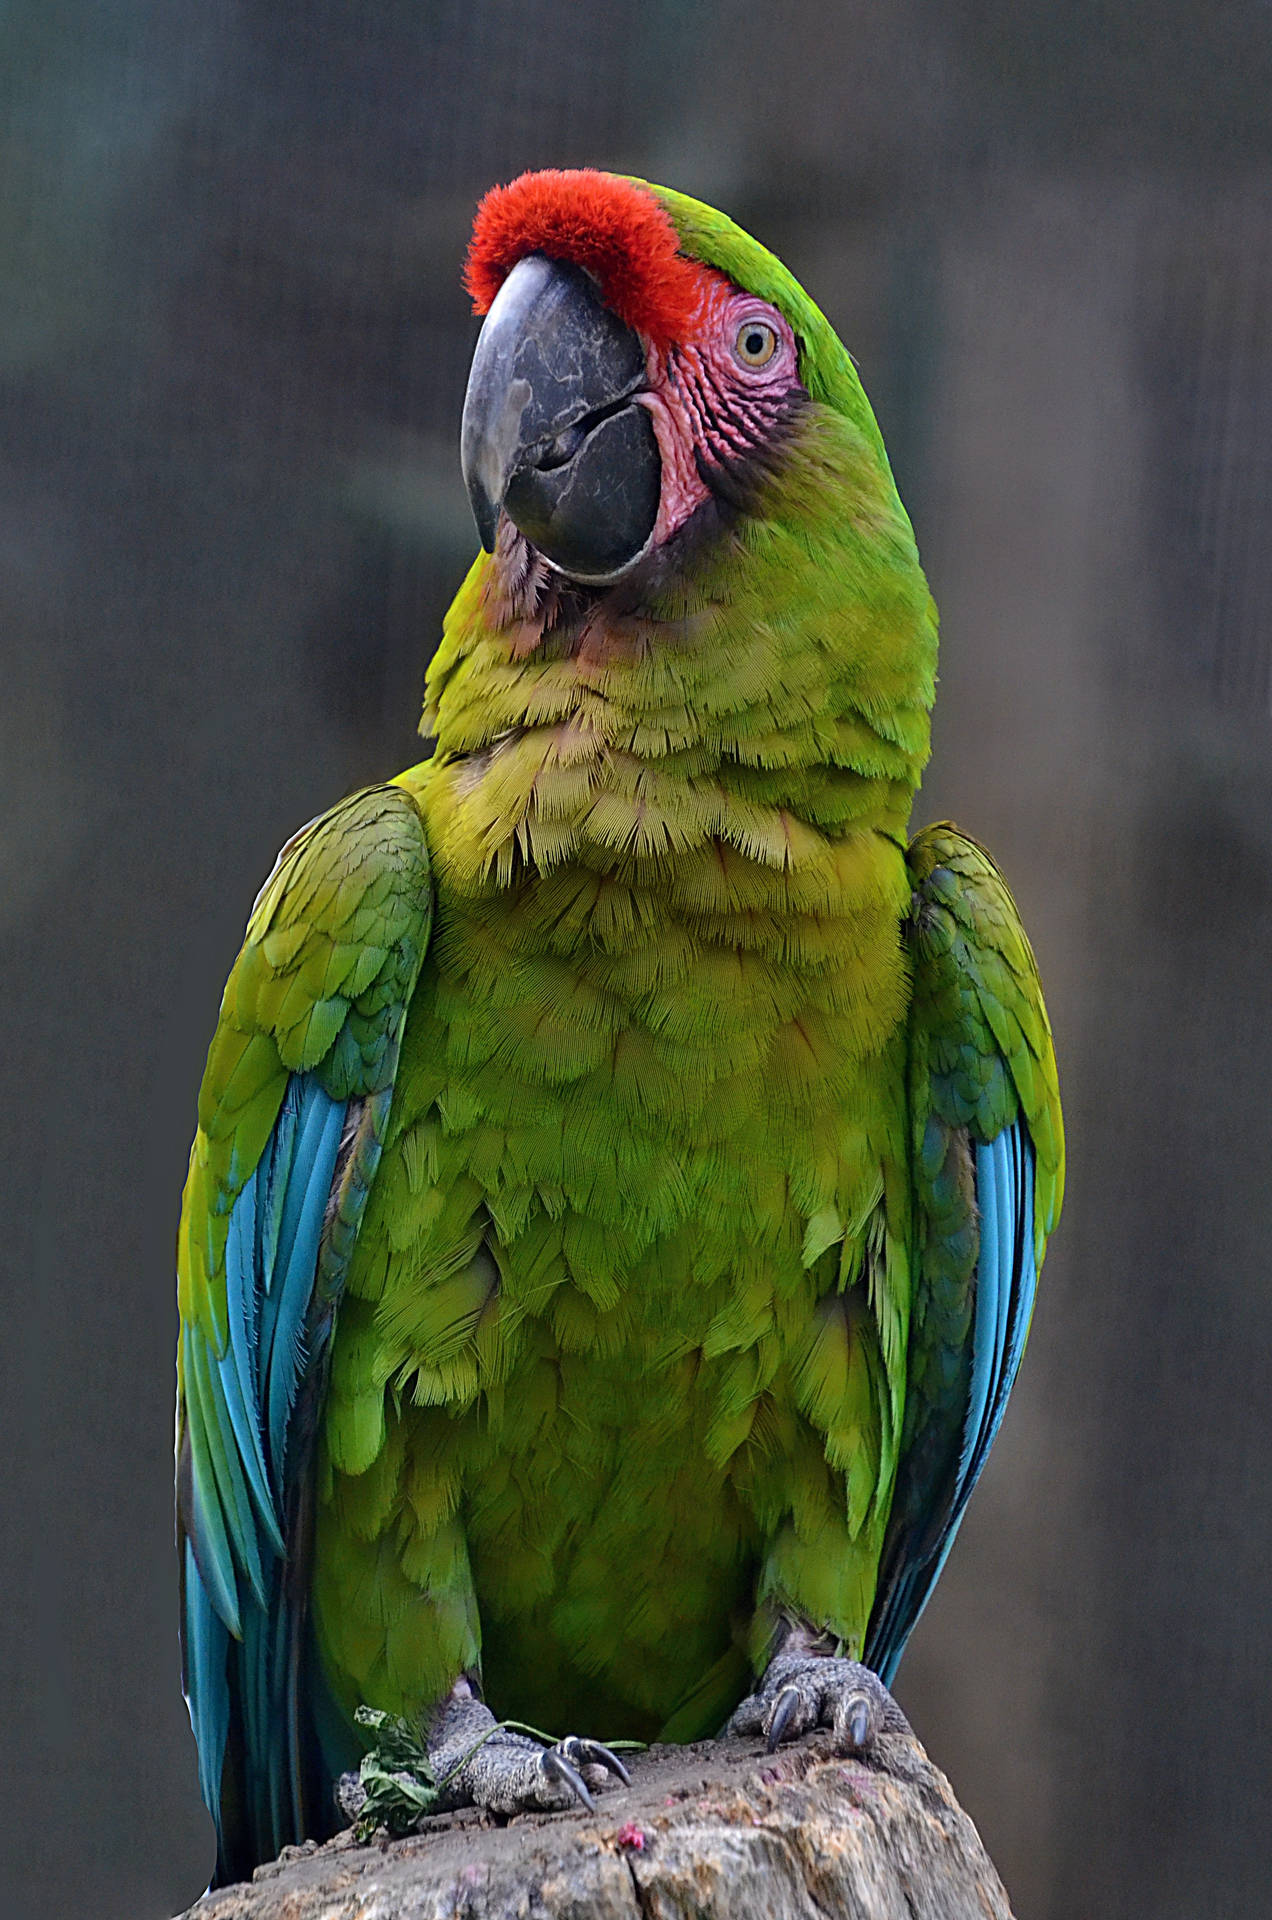 Red, Blue, And Green Parrot Hd